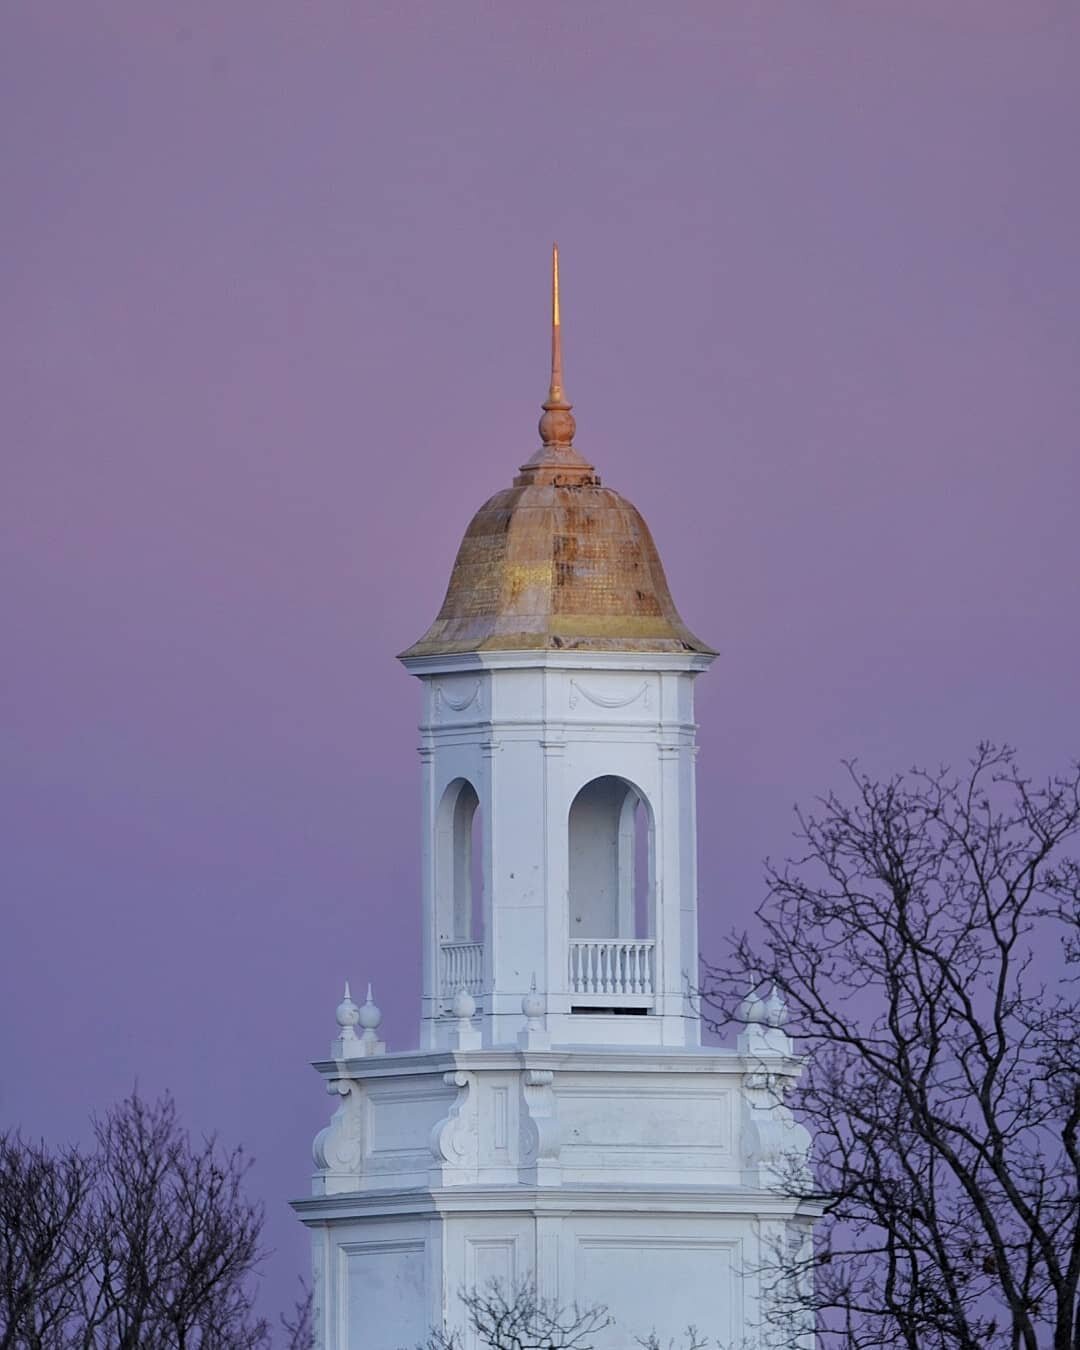 Last nights sunset over the Wilbur cross building in storrs campus was a beautiful hue of purple. 

I wanted to share a post everyday but im already falling behind but ill still try to post more this year than last. Time to grow my online presence!

